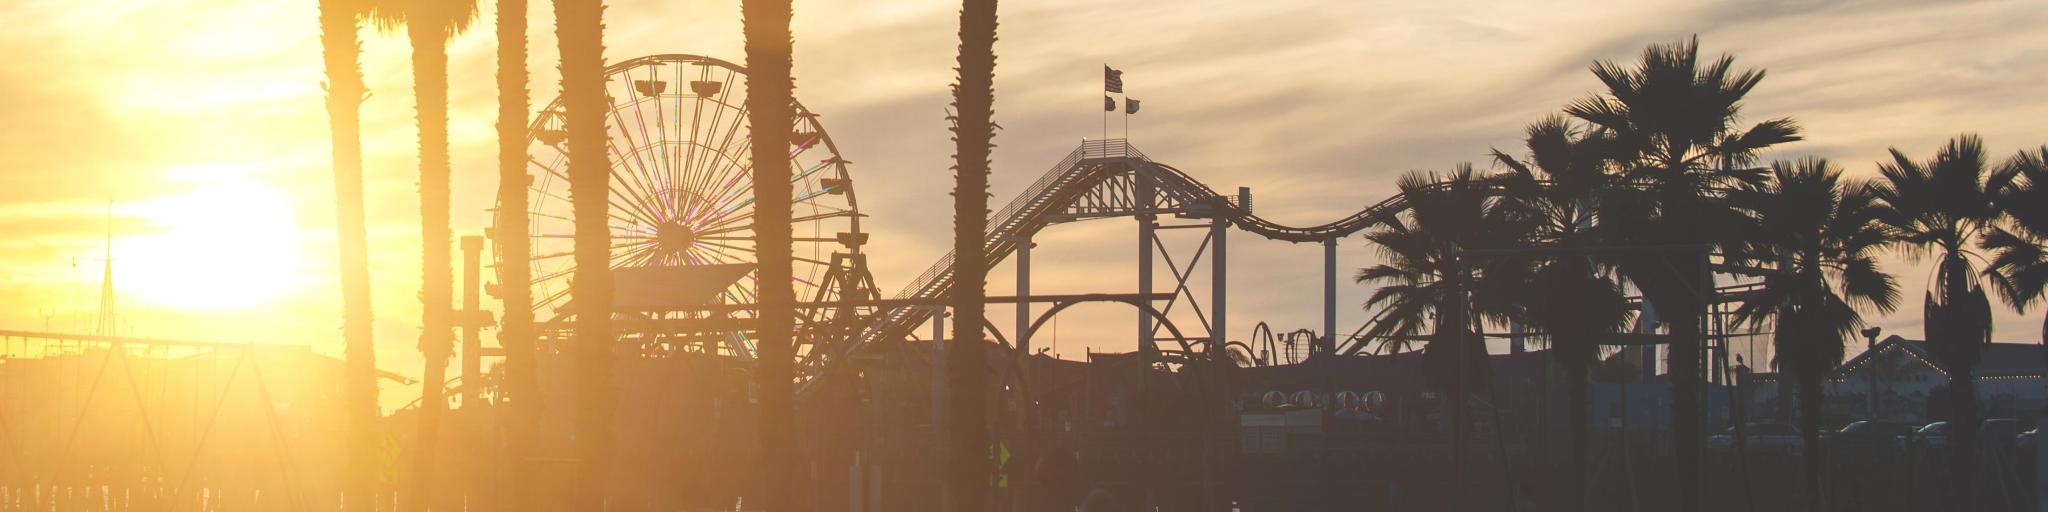 Santa Monica, California, USA with a view of the pier with palms silhouettes at sunset.